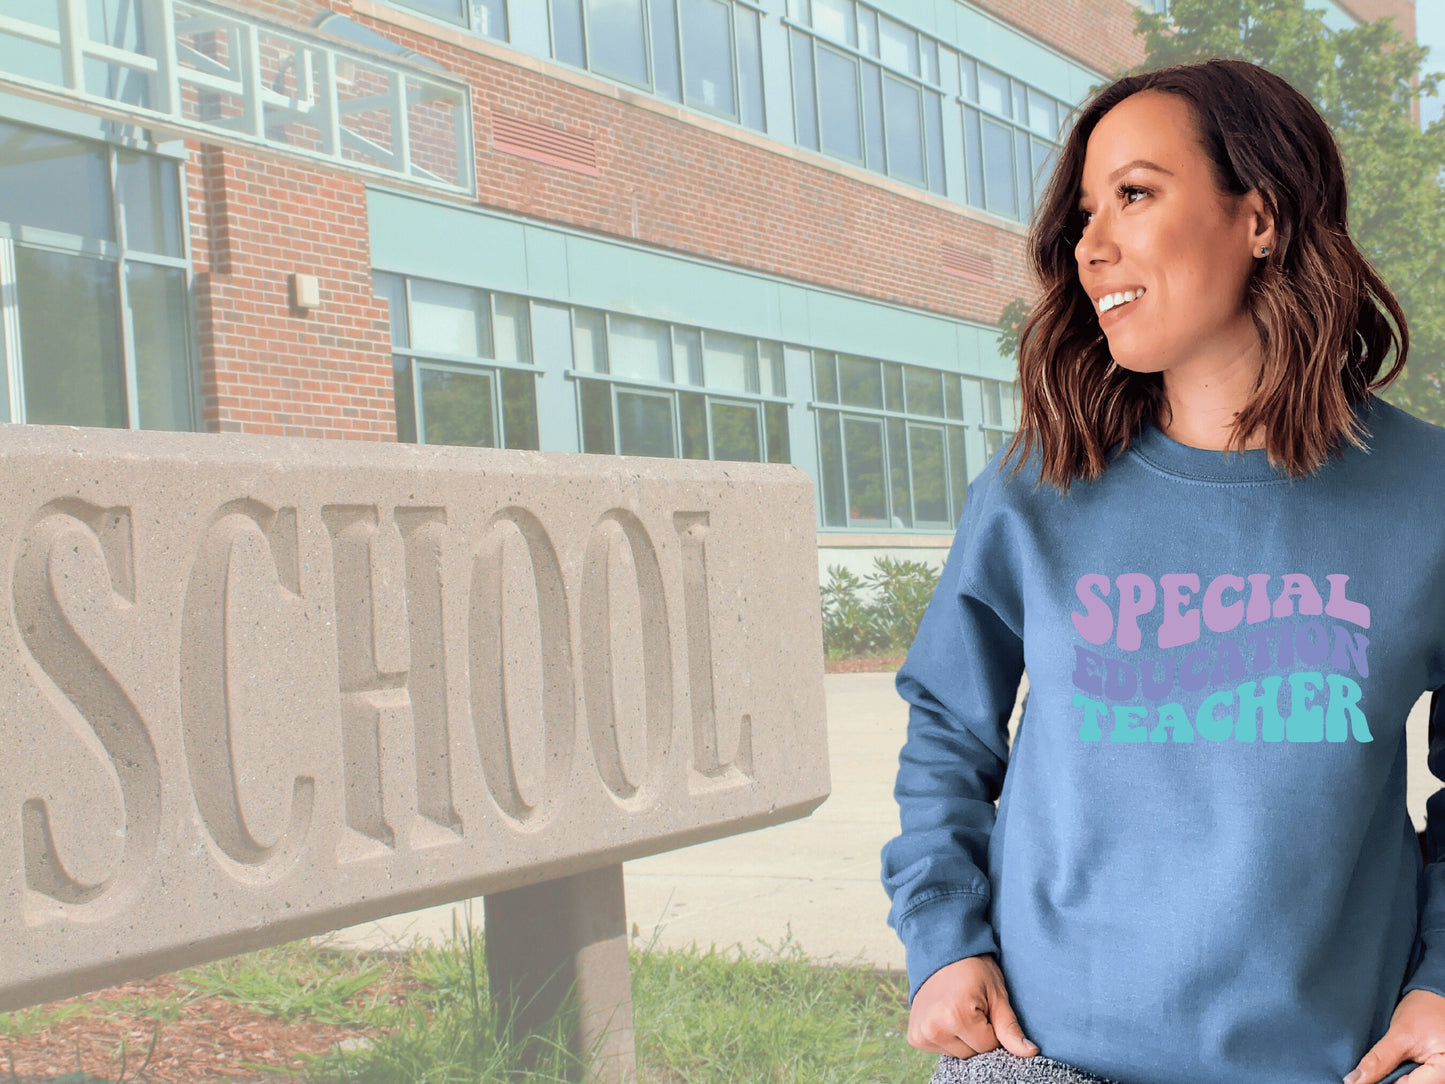 Special Education Teacher Shirt, Special Ed Sweatshirt, Team Sped shirt, Sped Crew, Sped Student, Special Ed Teacher Gift